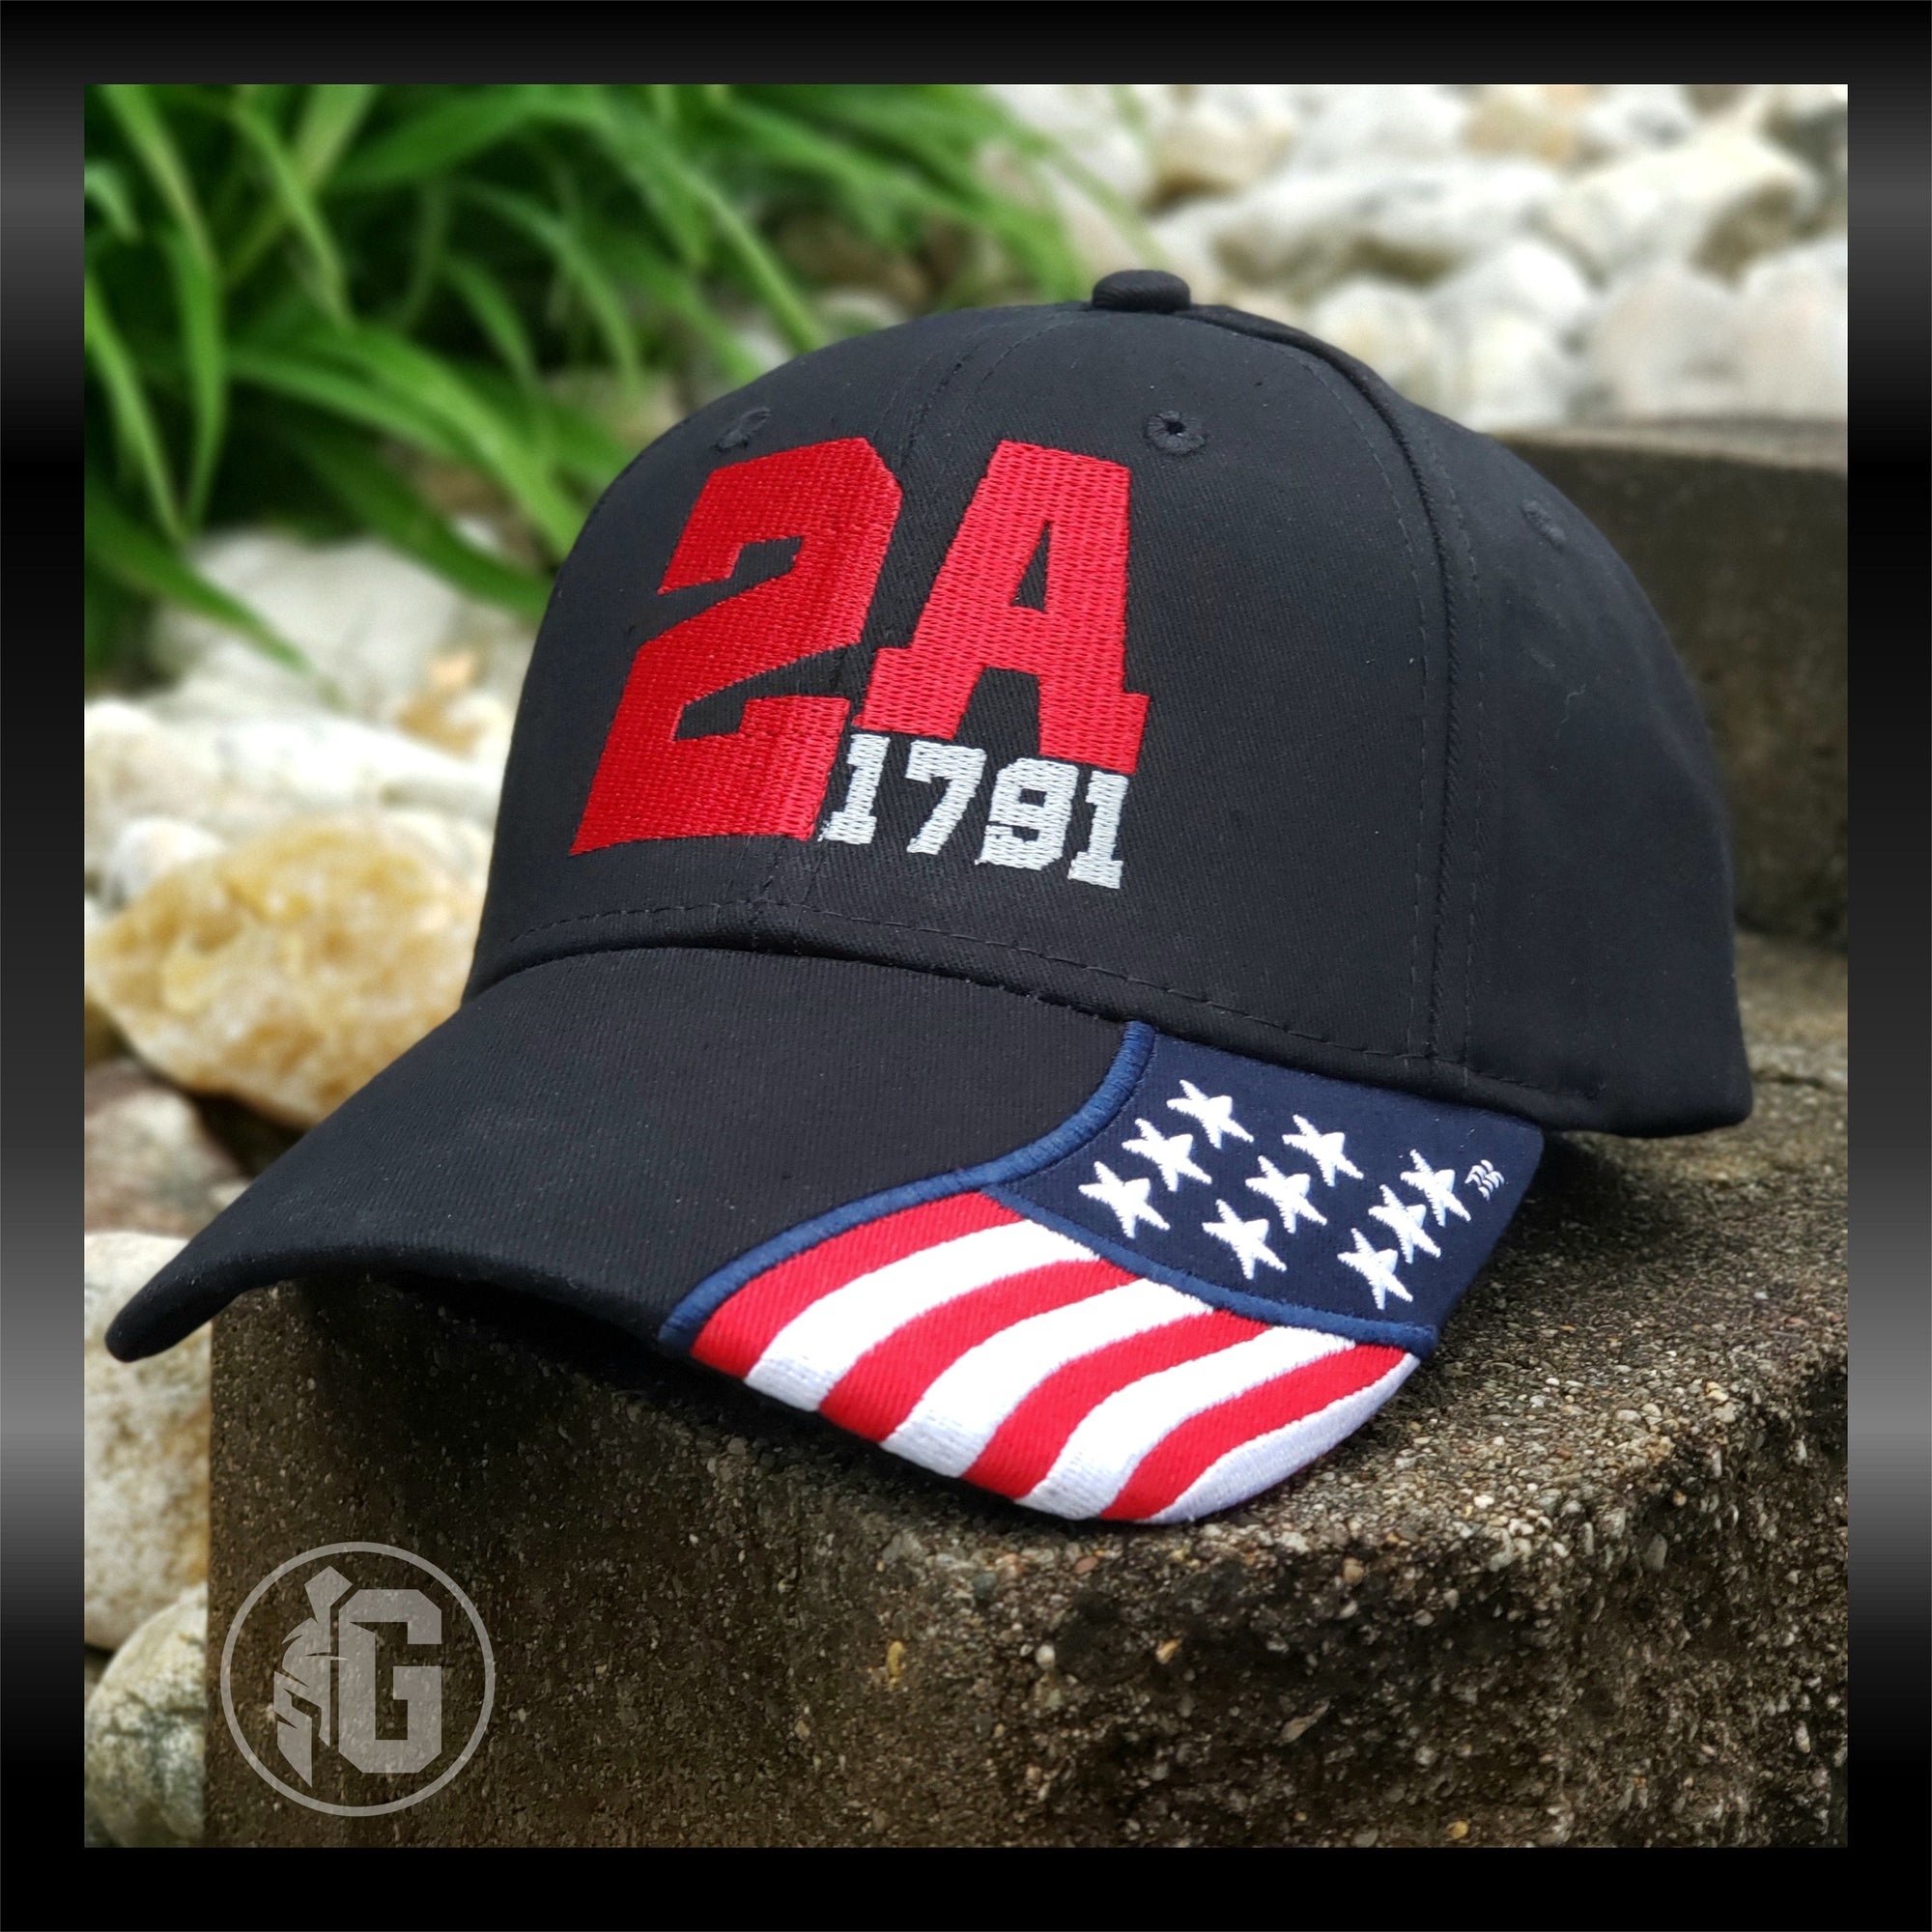 2A 1791 W/ American Flag on Bill Embroidered Hat